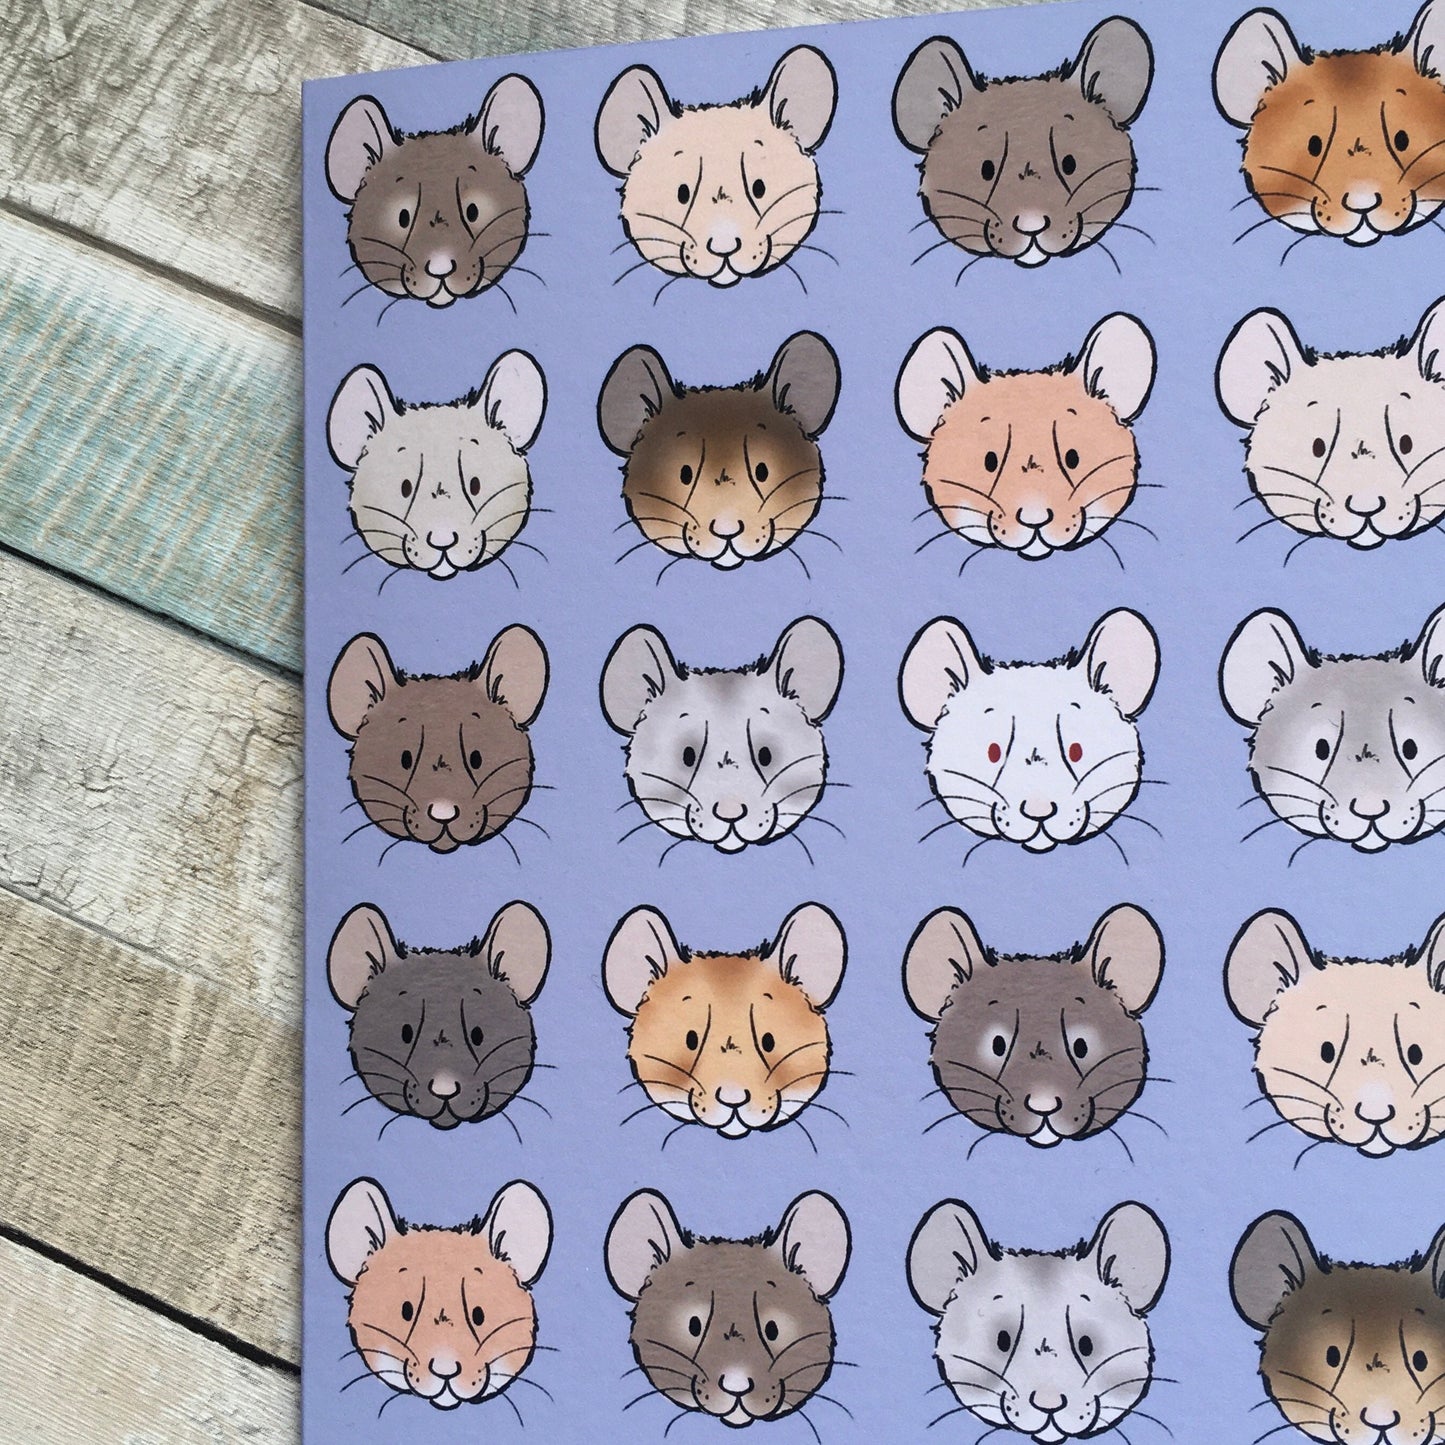 Hamster Faces Greeting Card, A6 Blank Greeting card, Cute Hamster Gift Card